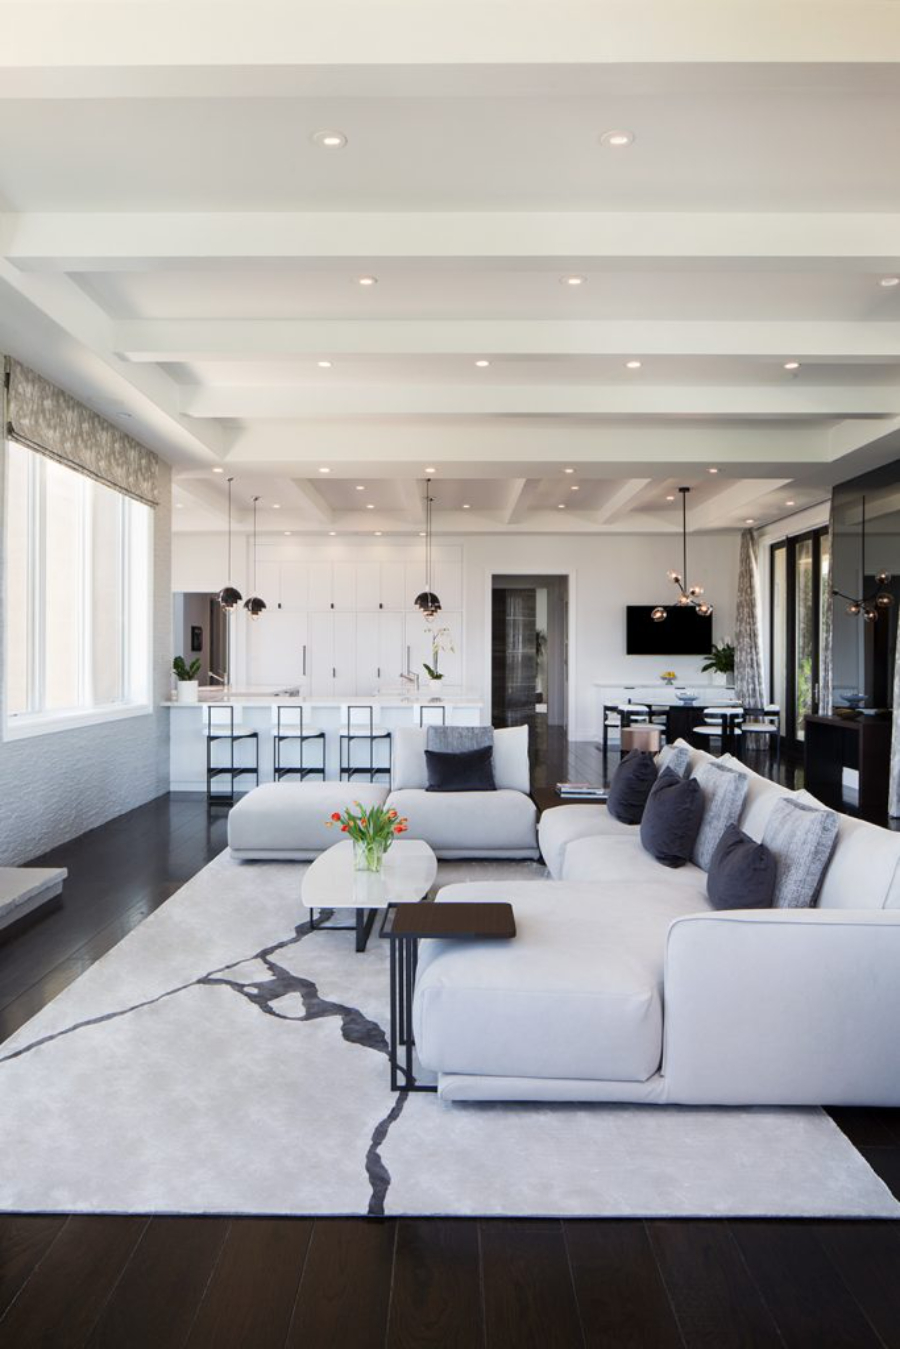 The Best Selection Of Interior Designers in California